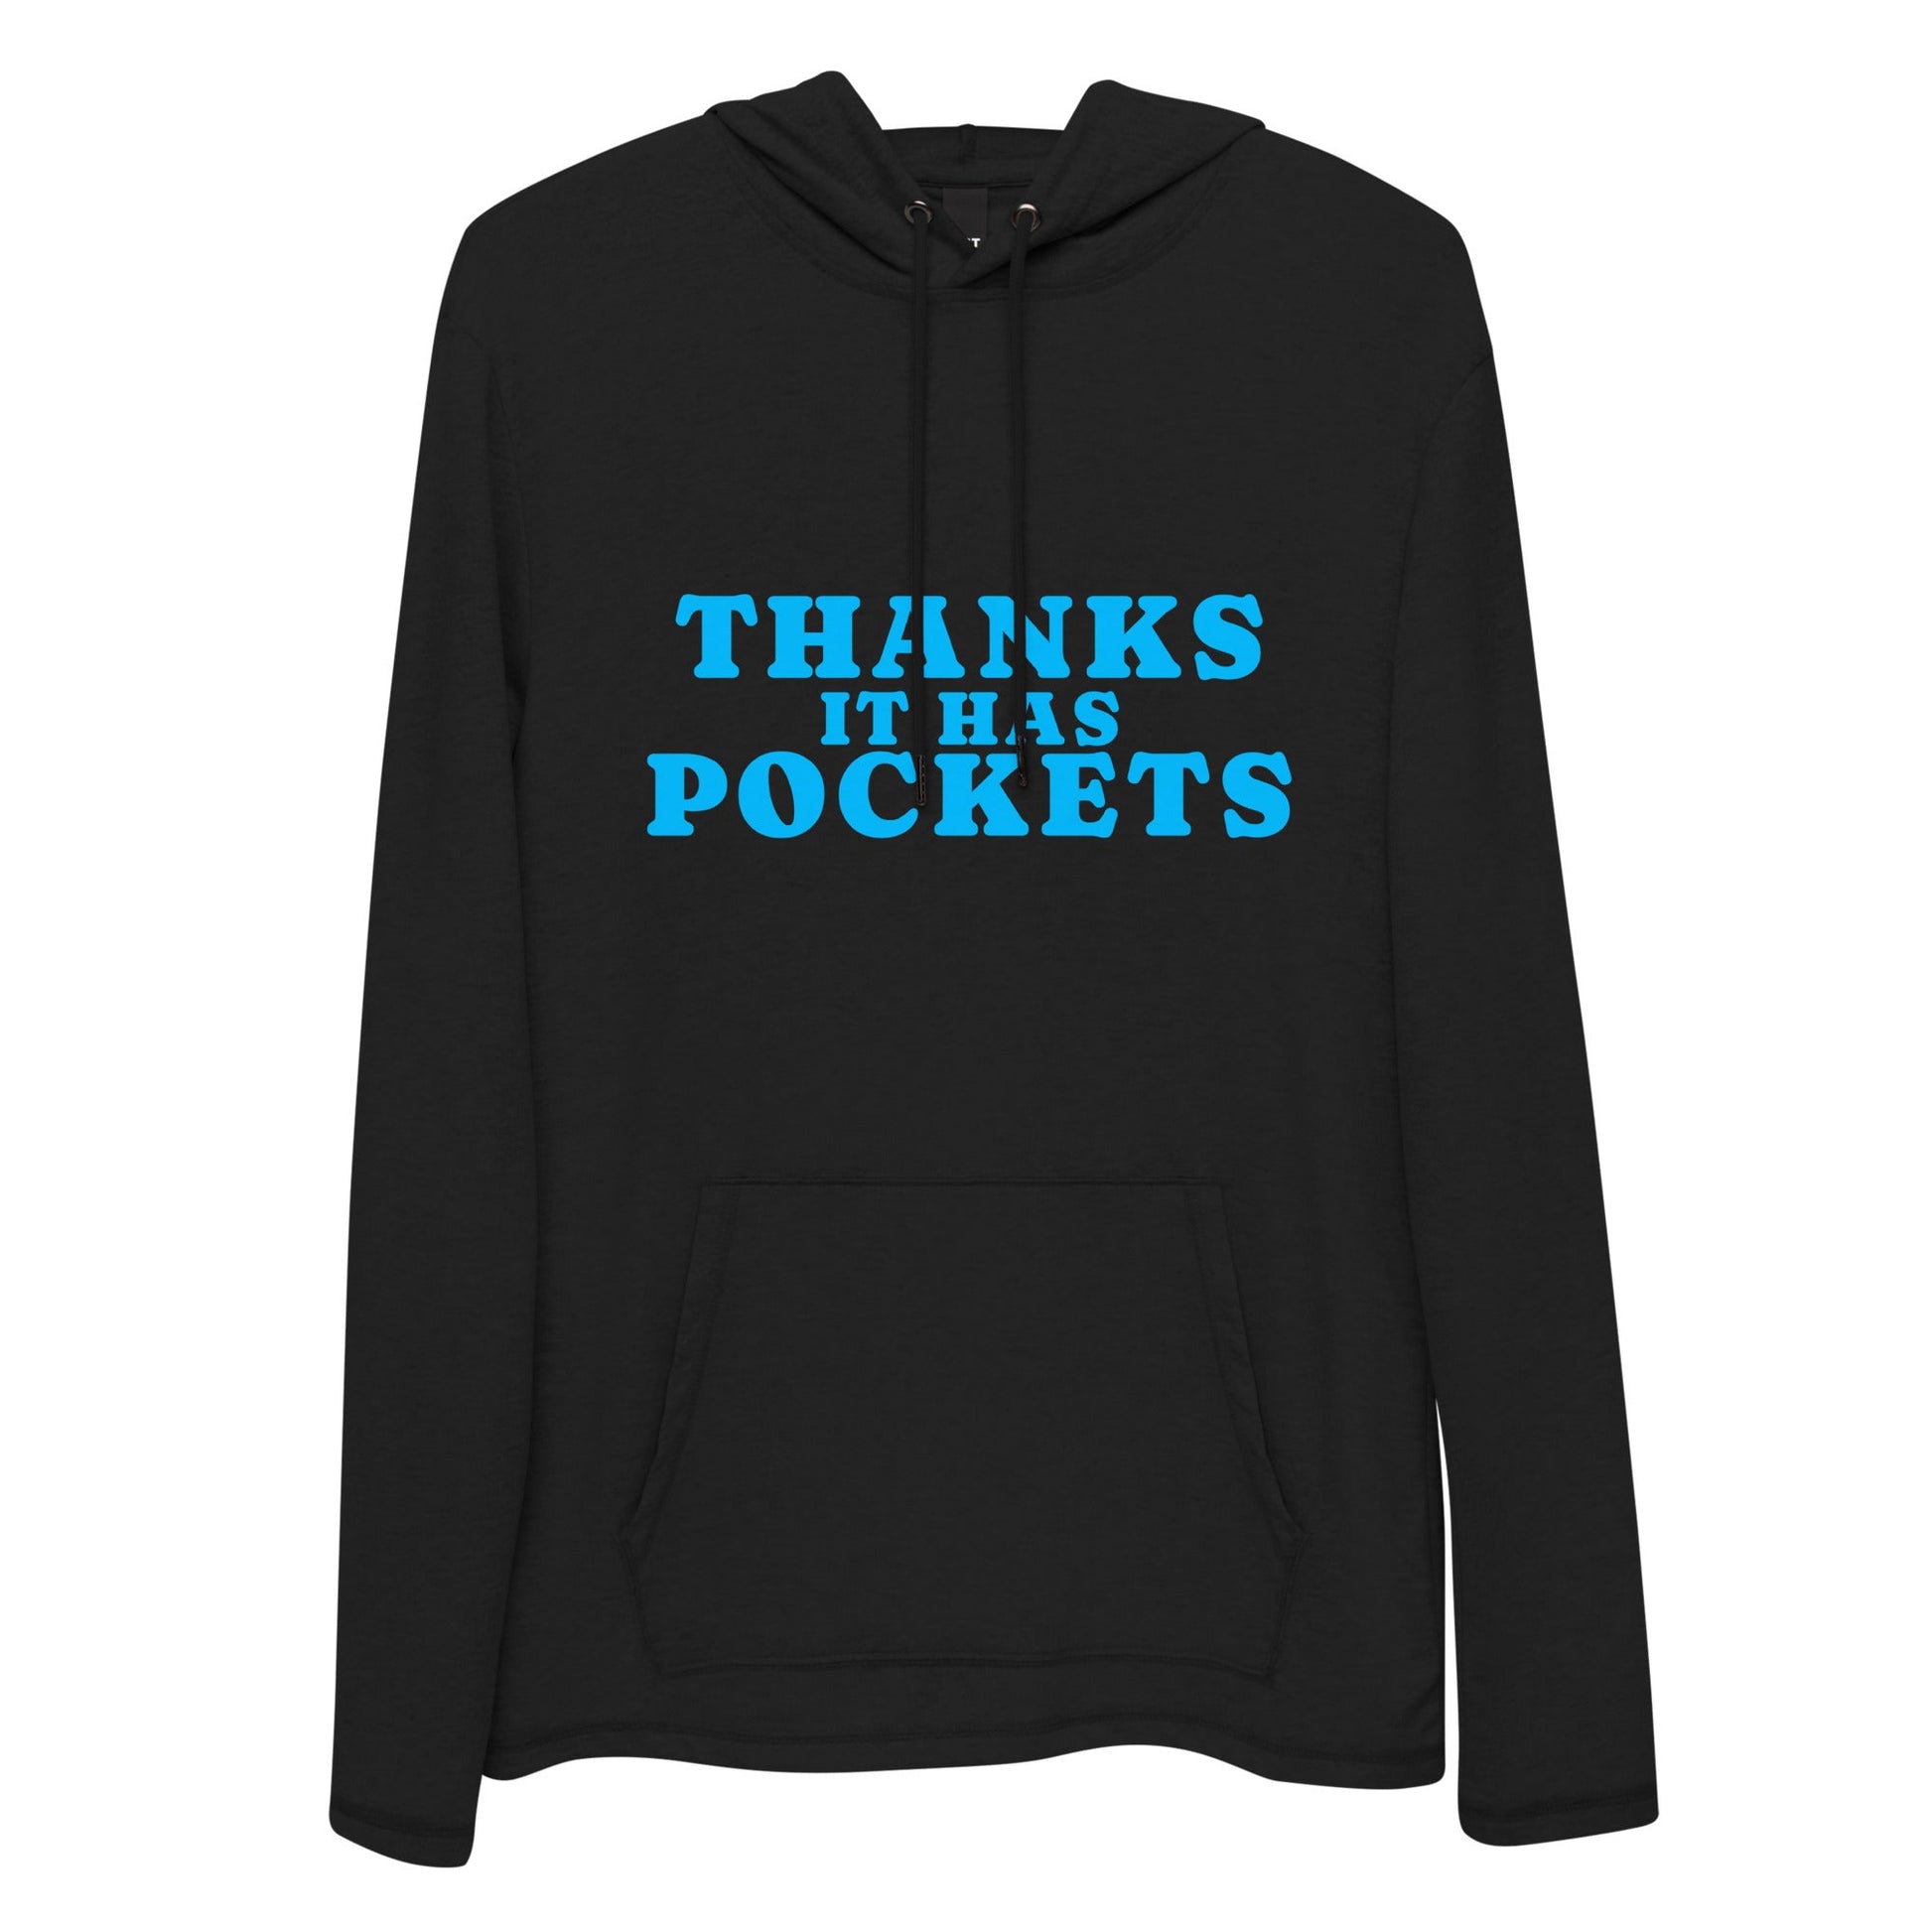 "Thanks it has Pockets" Lightweight hoodie. - The Nerd Supply Company